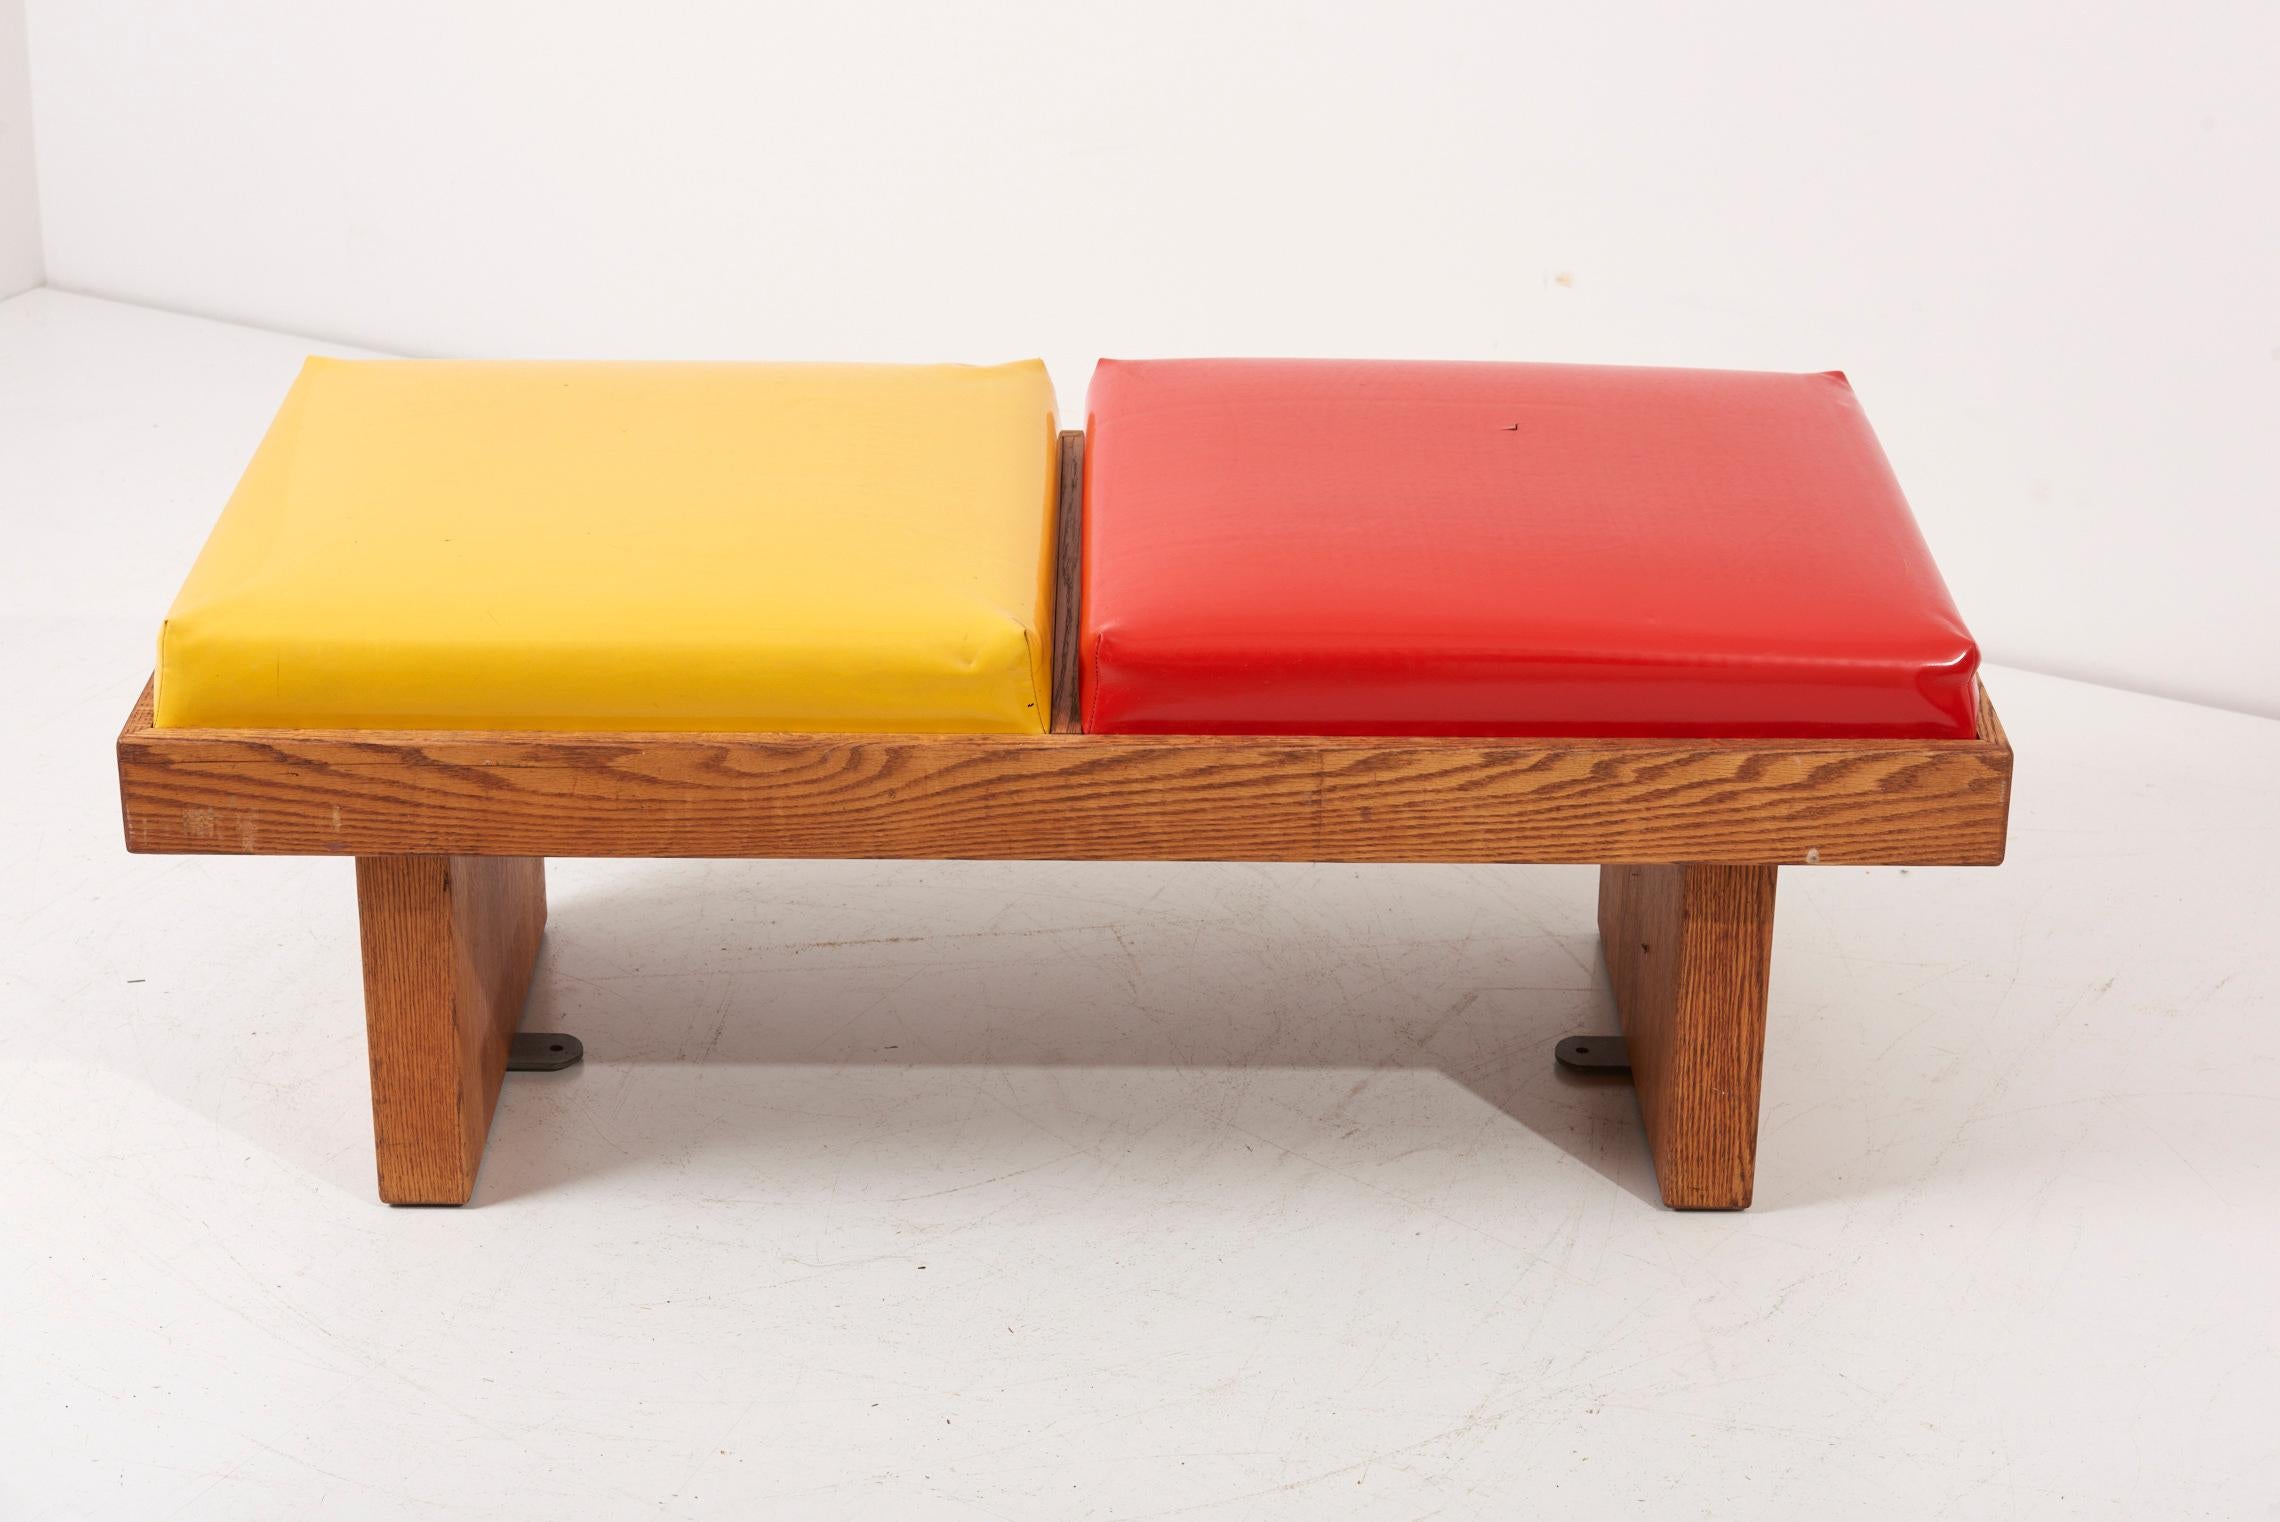 Bench by Harvey Probber in Ketchup / Mustard in Oak, USA 1960s For Sale 1